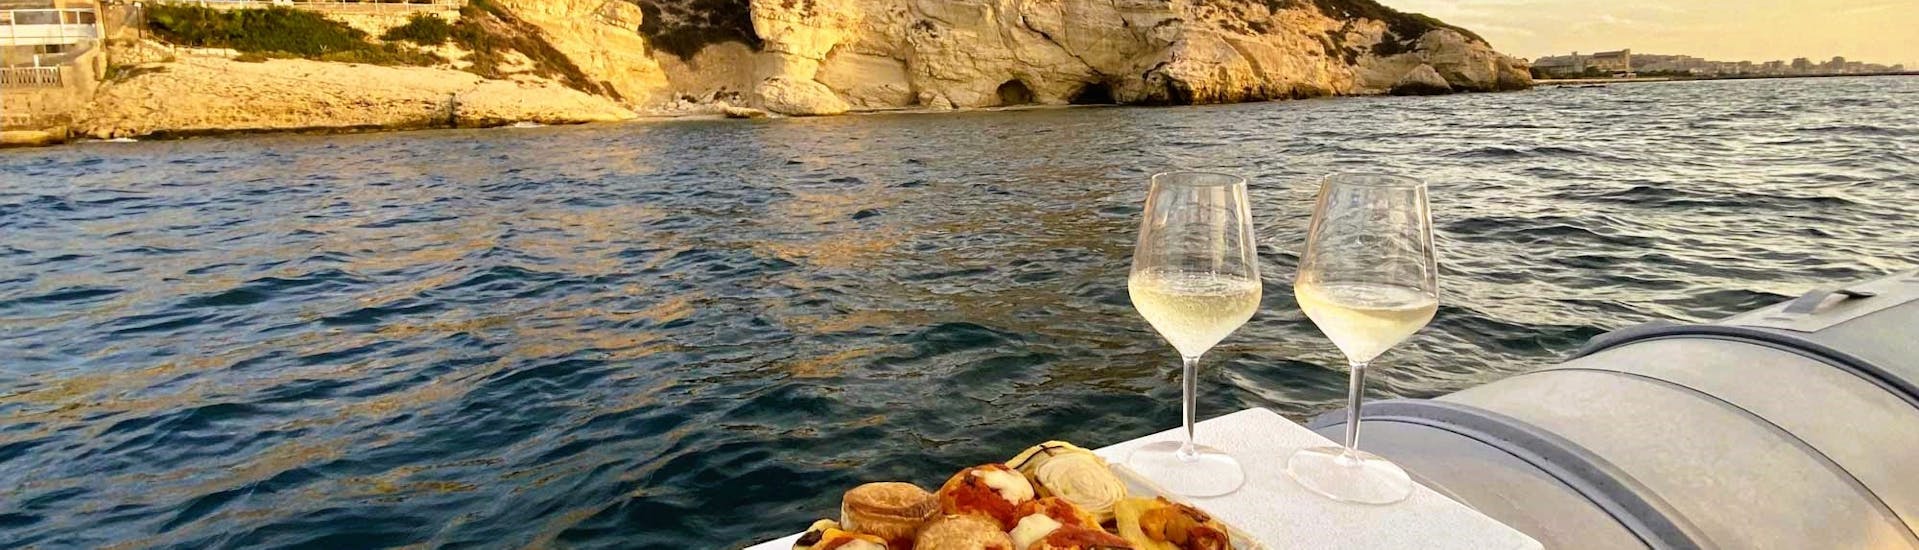 Sunset Boat Trip along the Coast of Cagliari with Apéritif